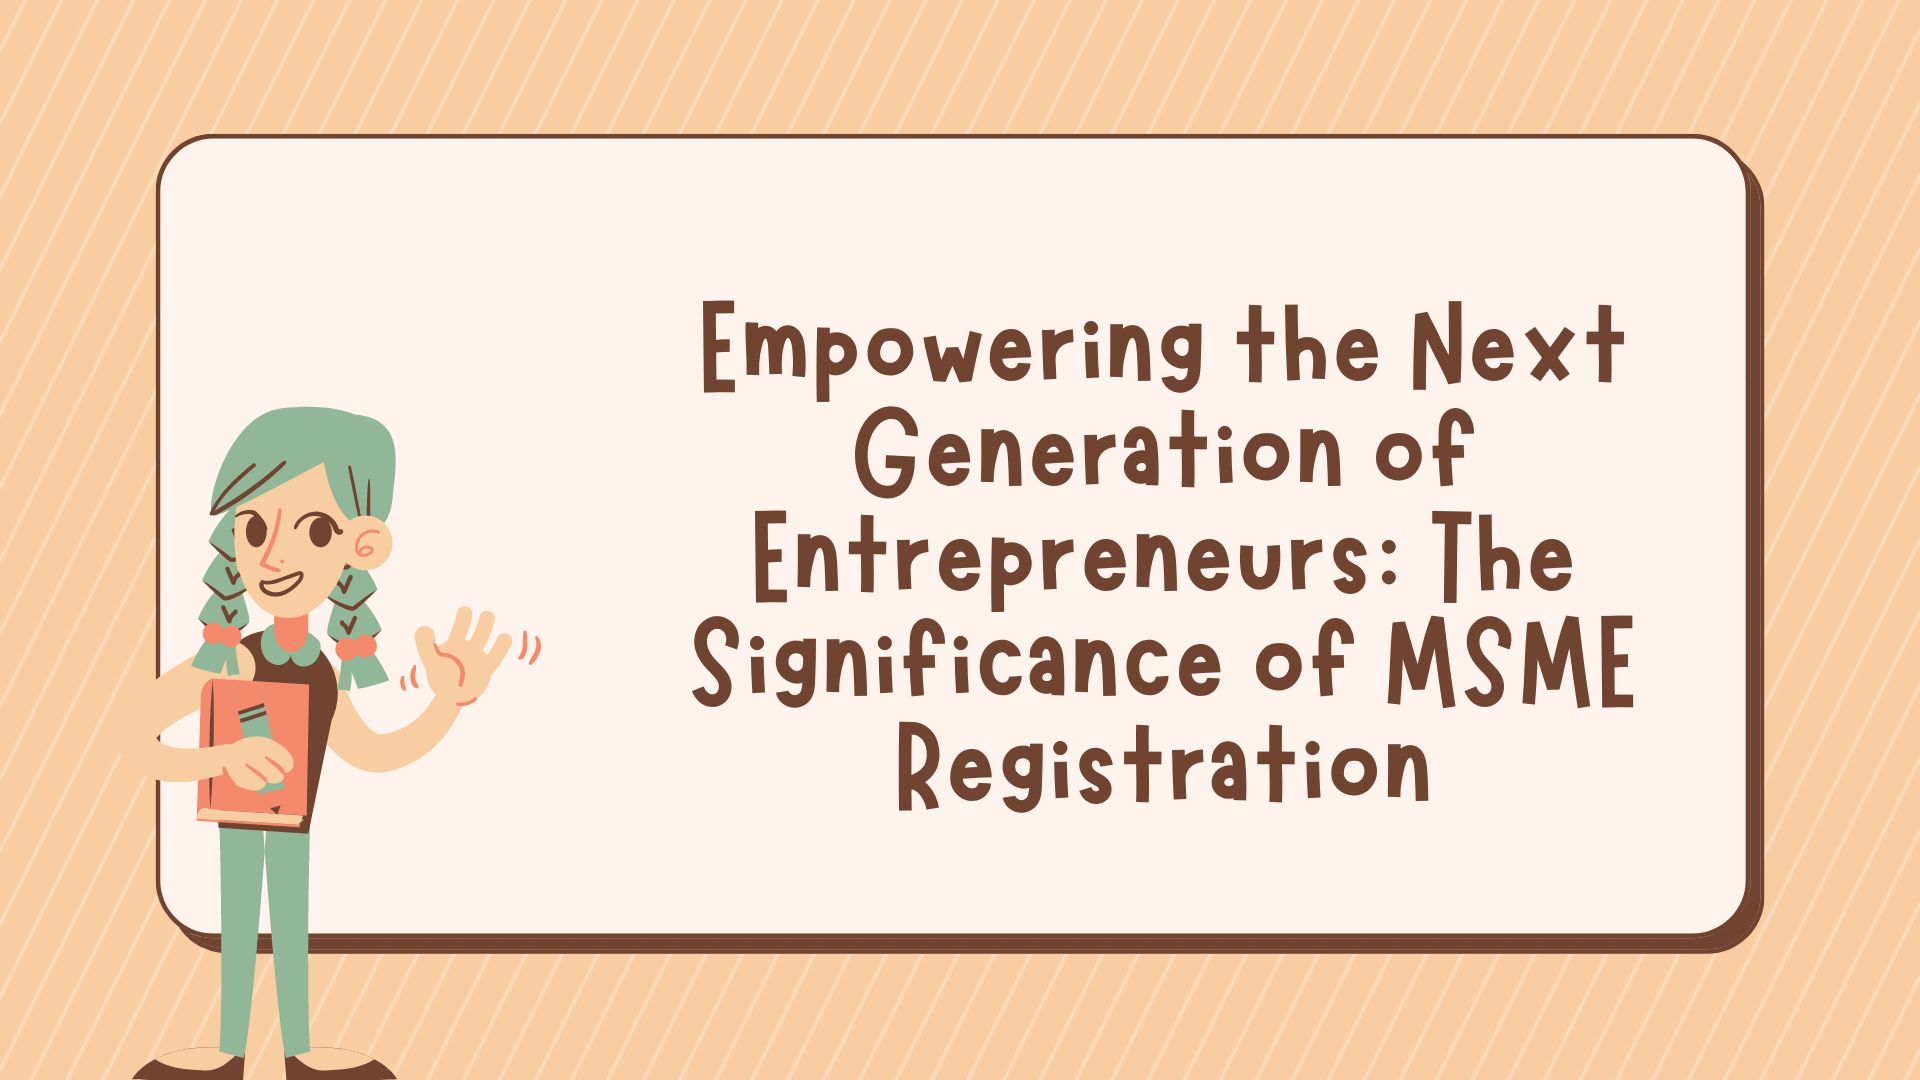 Empowering the Next Generation of Entrepreneurs: The Significance of MSME Registration